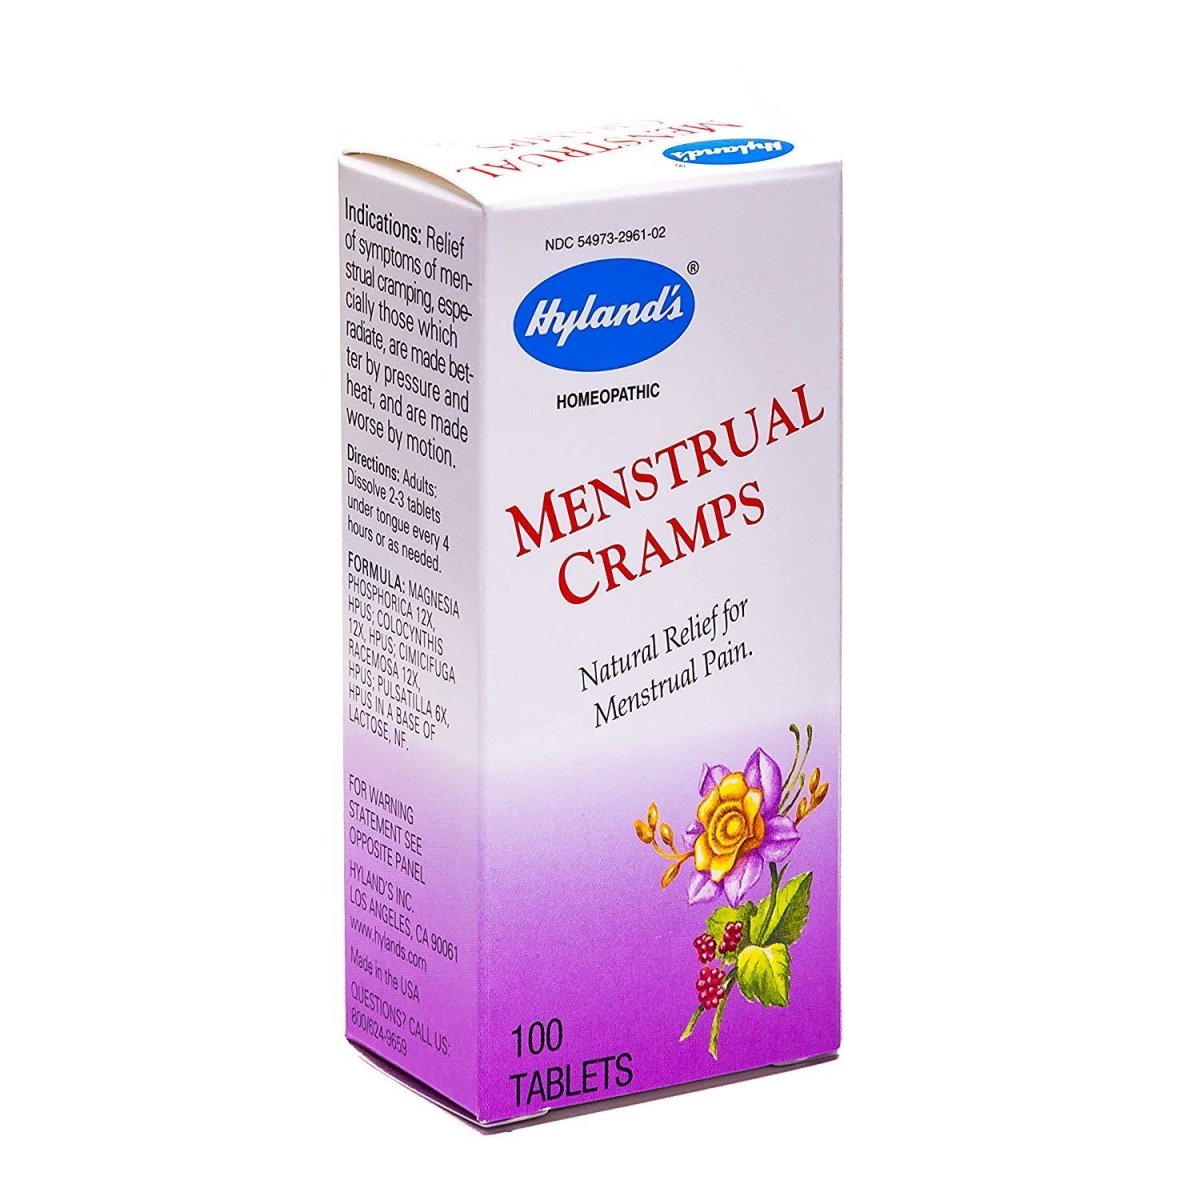 Menstrual Cramps - Natural Relief for Menstrual pain 100 Tablets